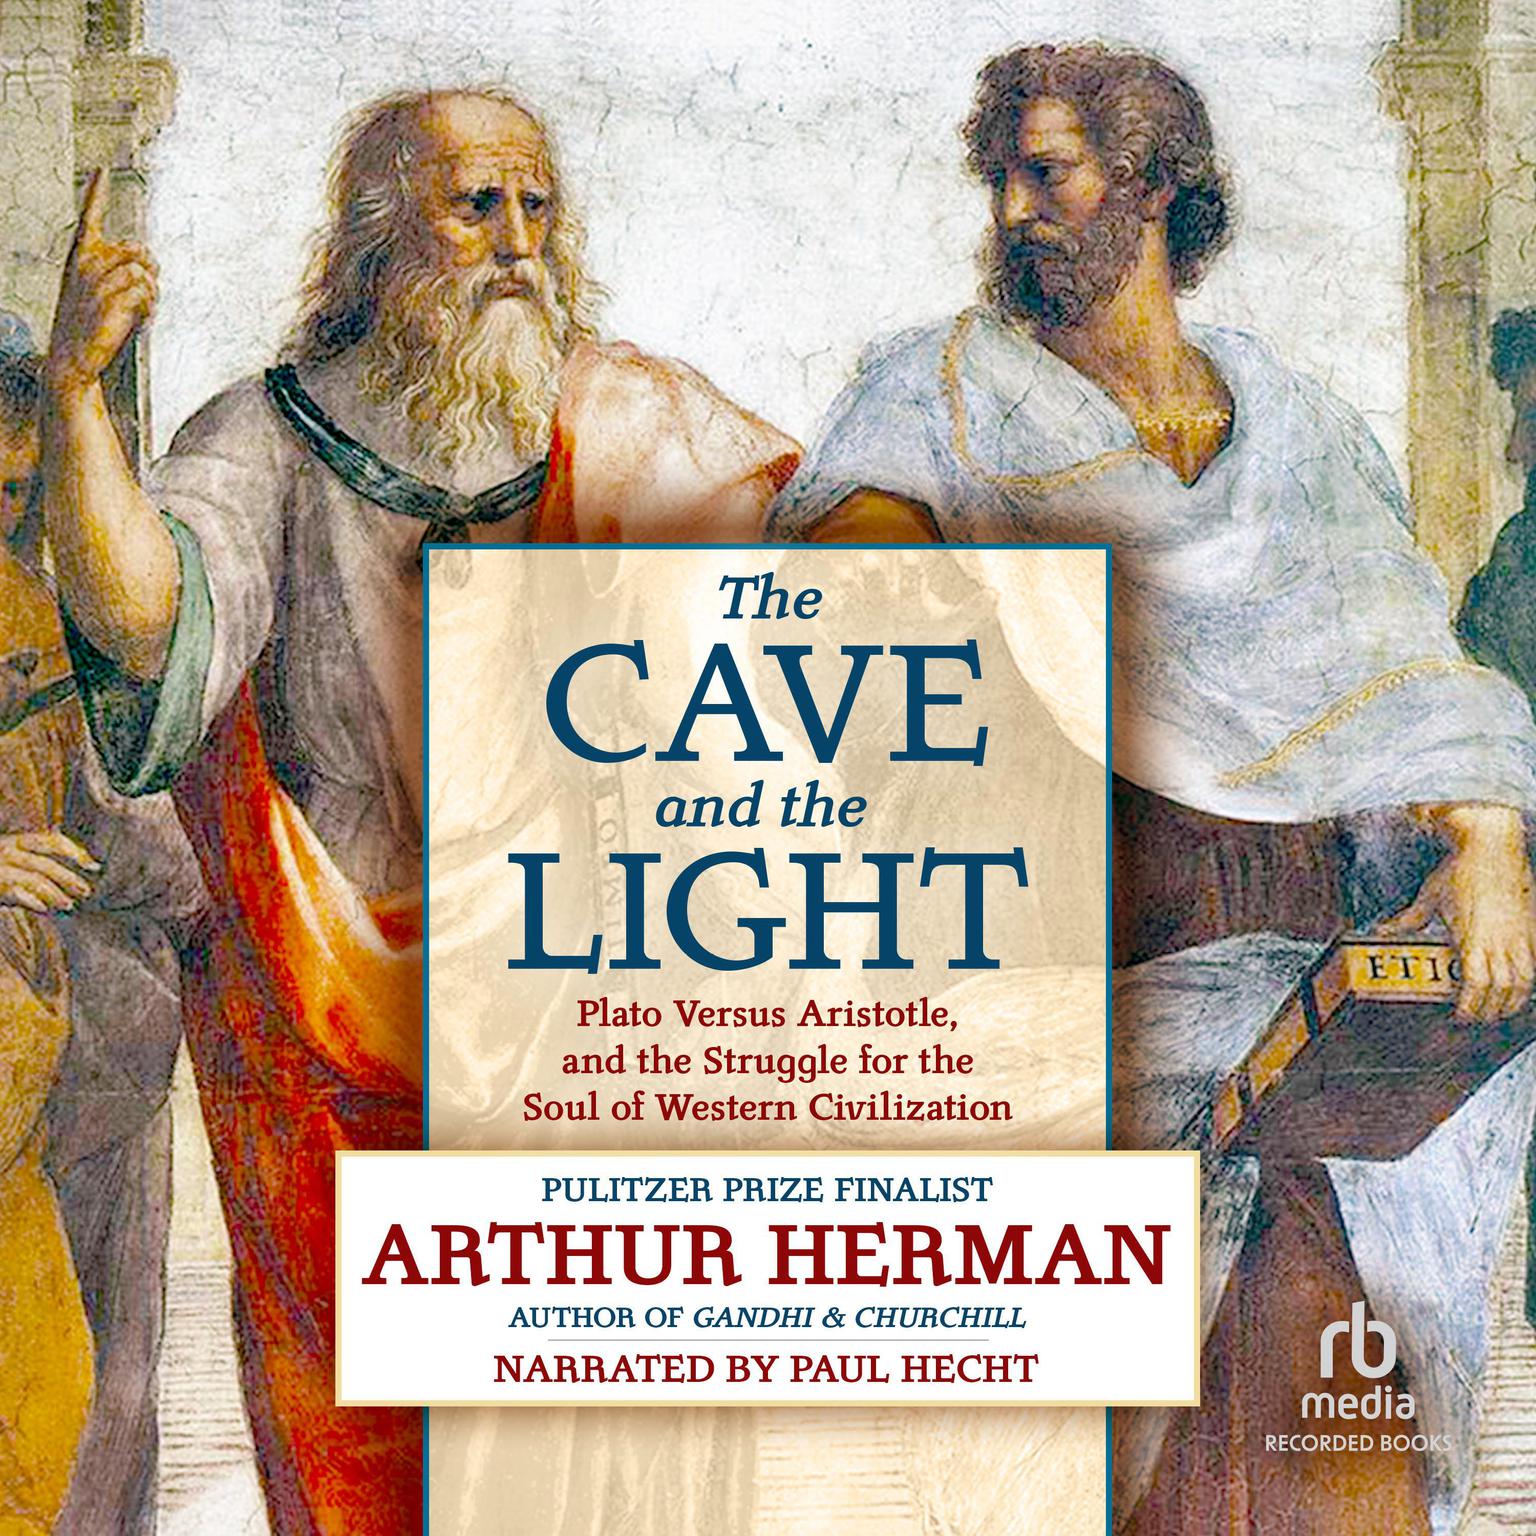 The Cave and the Light: Plato Versus Aristotle, and the Struggle for the Soul of Western Civilization Audiobook, by Arthur Herman